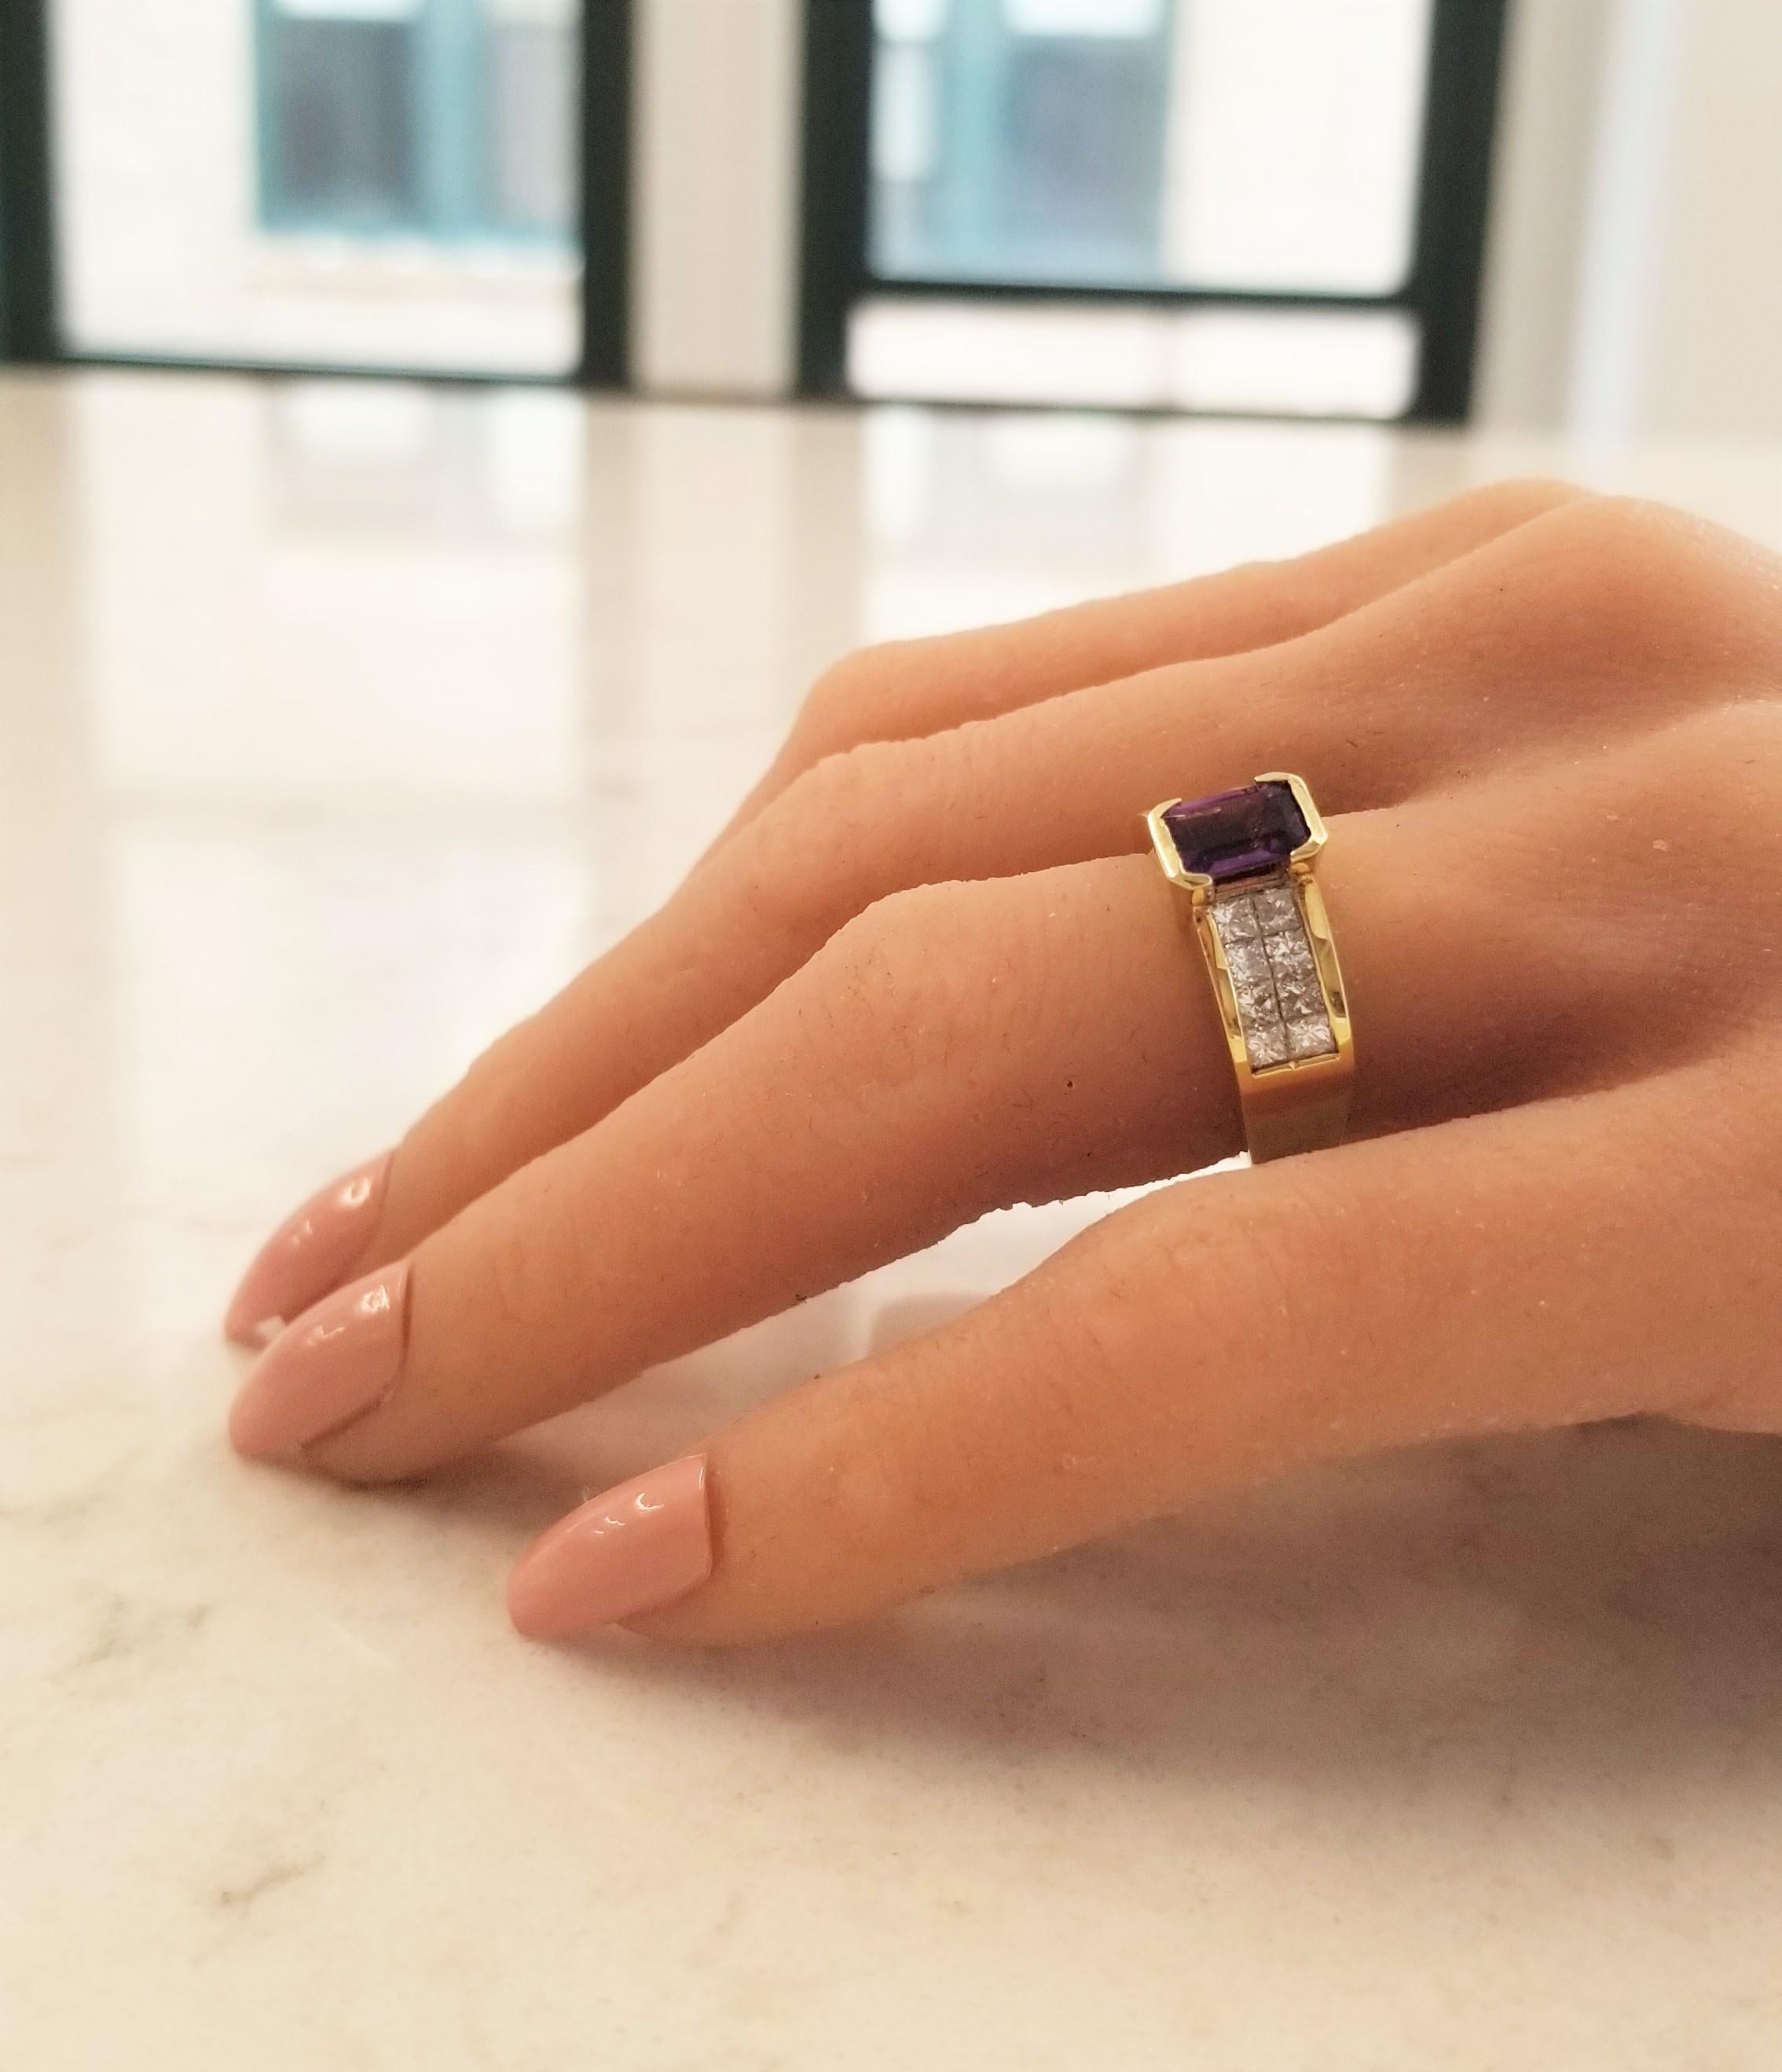 Exceptionally regal and ravishingly elegant. This 18 Karat yellow gold amethyst and diamond ring delivers on style points. The amethyst is originating from Brazil. Dazzling invisible set princess cut diamonds (F-G color; VS clarity) set this ring